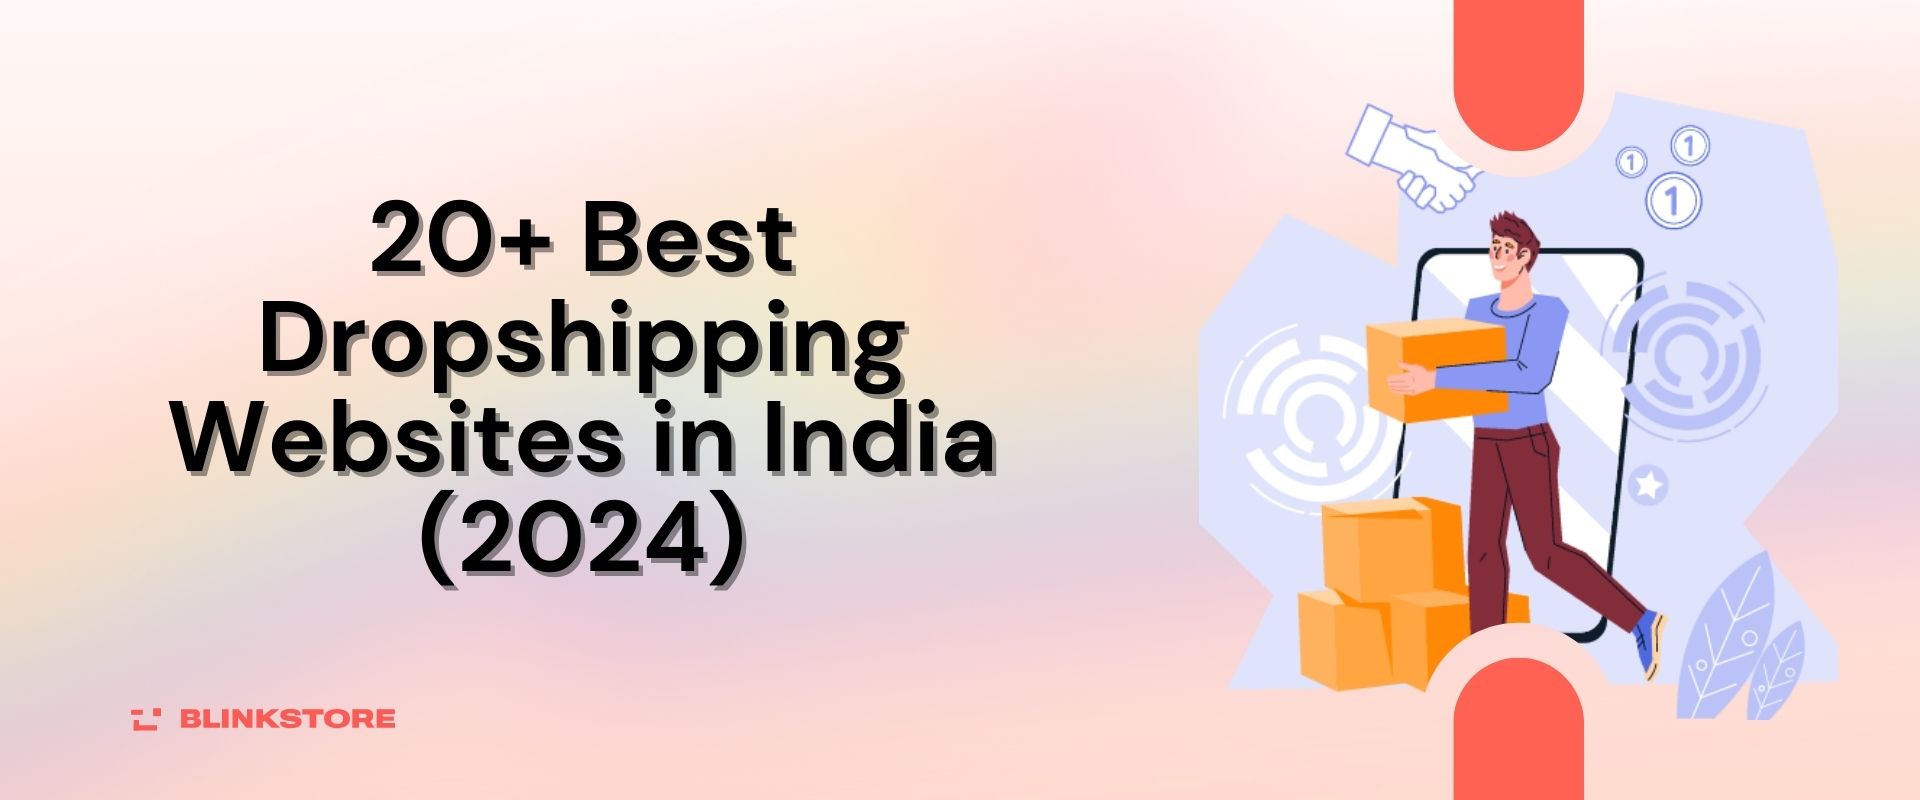 20+ Best Dropshipping Websites in India (2024)